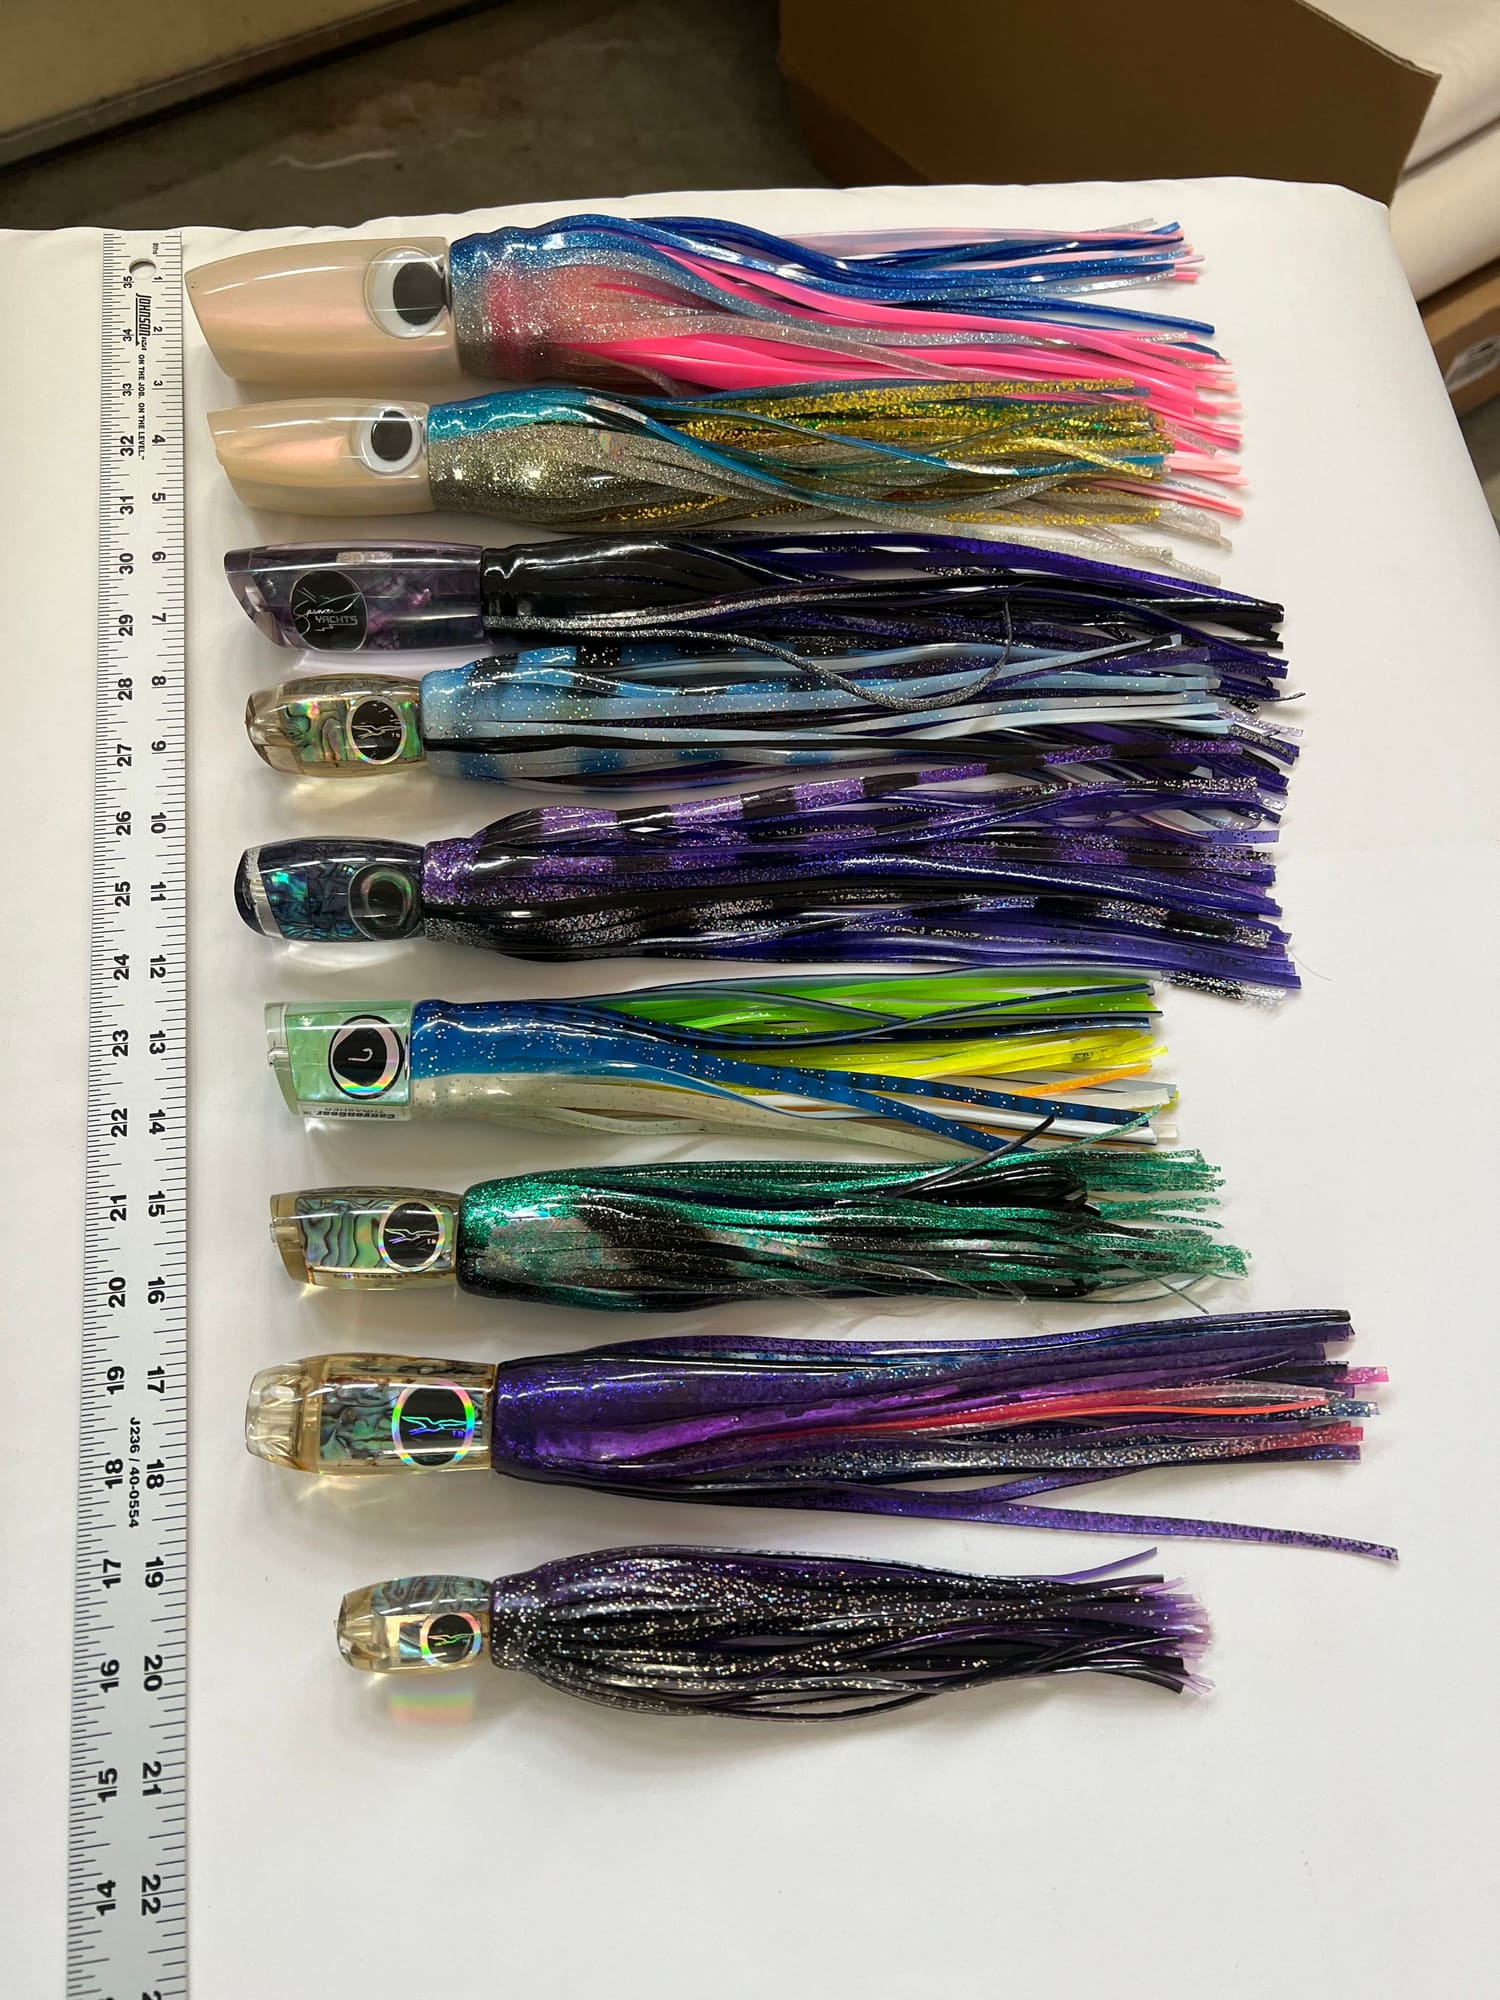 Black Bart, Moyes, Fathom Resin Lures - The Hull Truth - Boating and Fishing  Forum